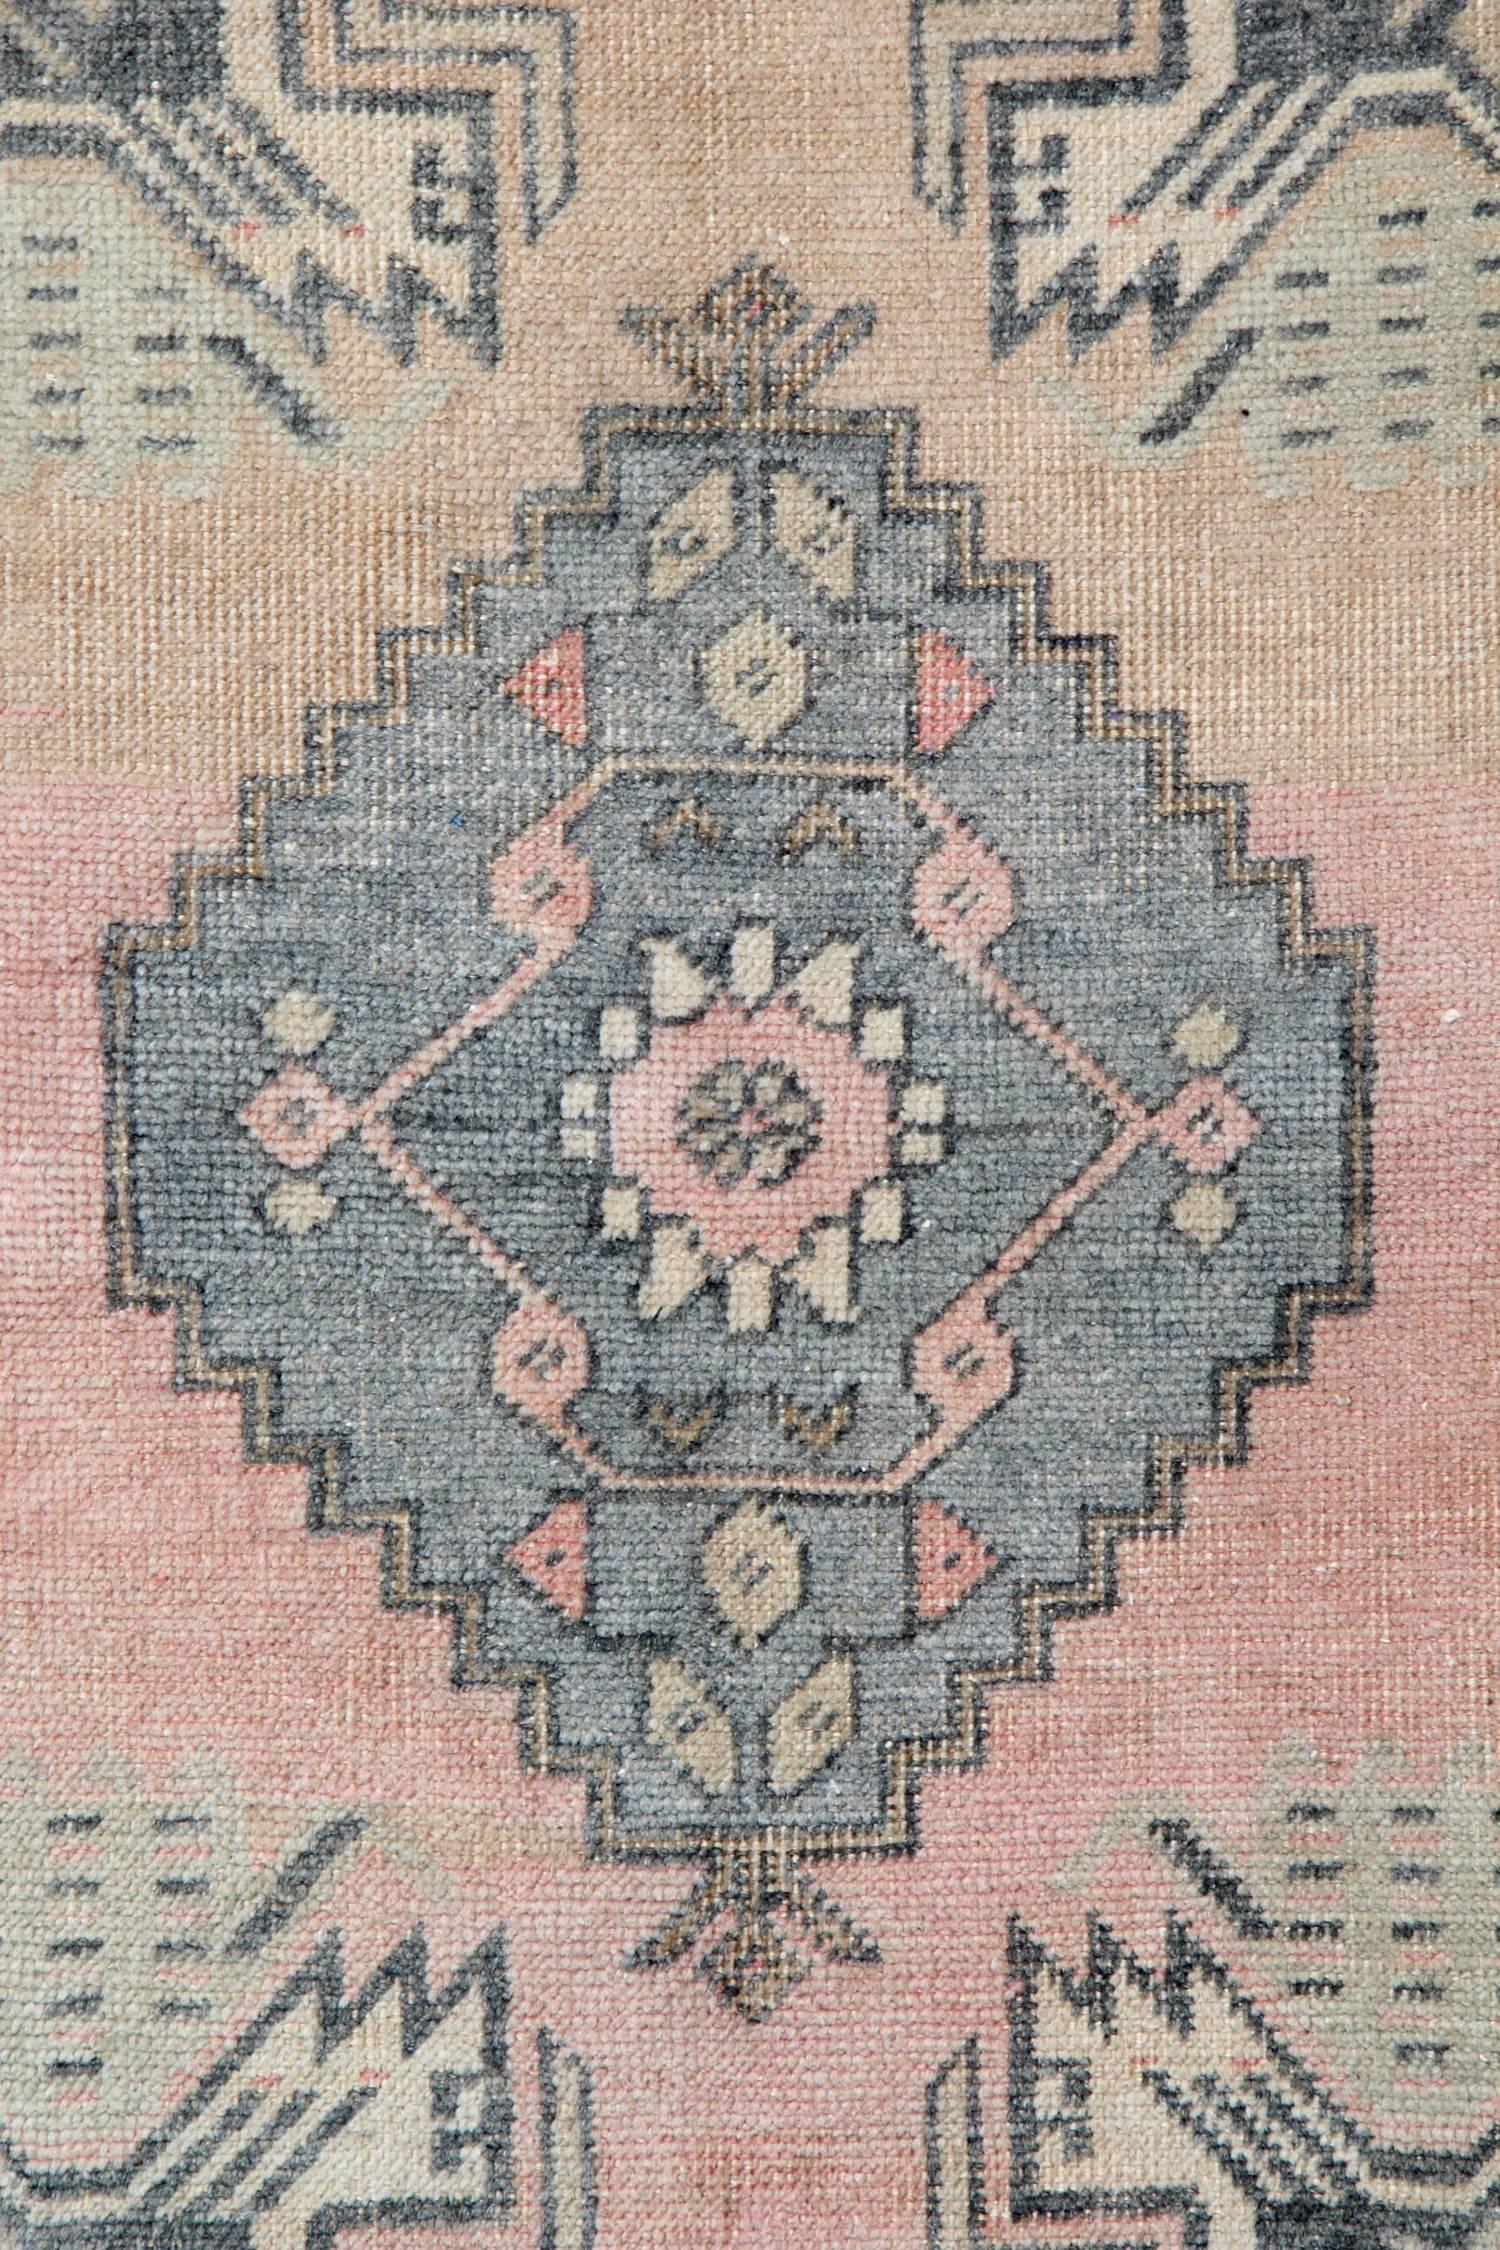 Hand-Crafted Vintage Turkish Rug from Anatolia